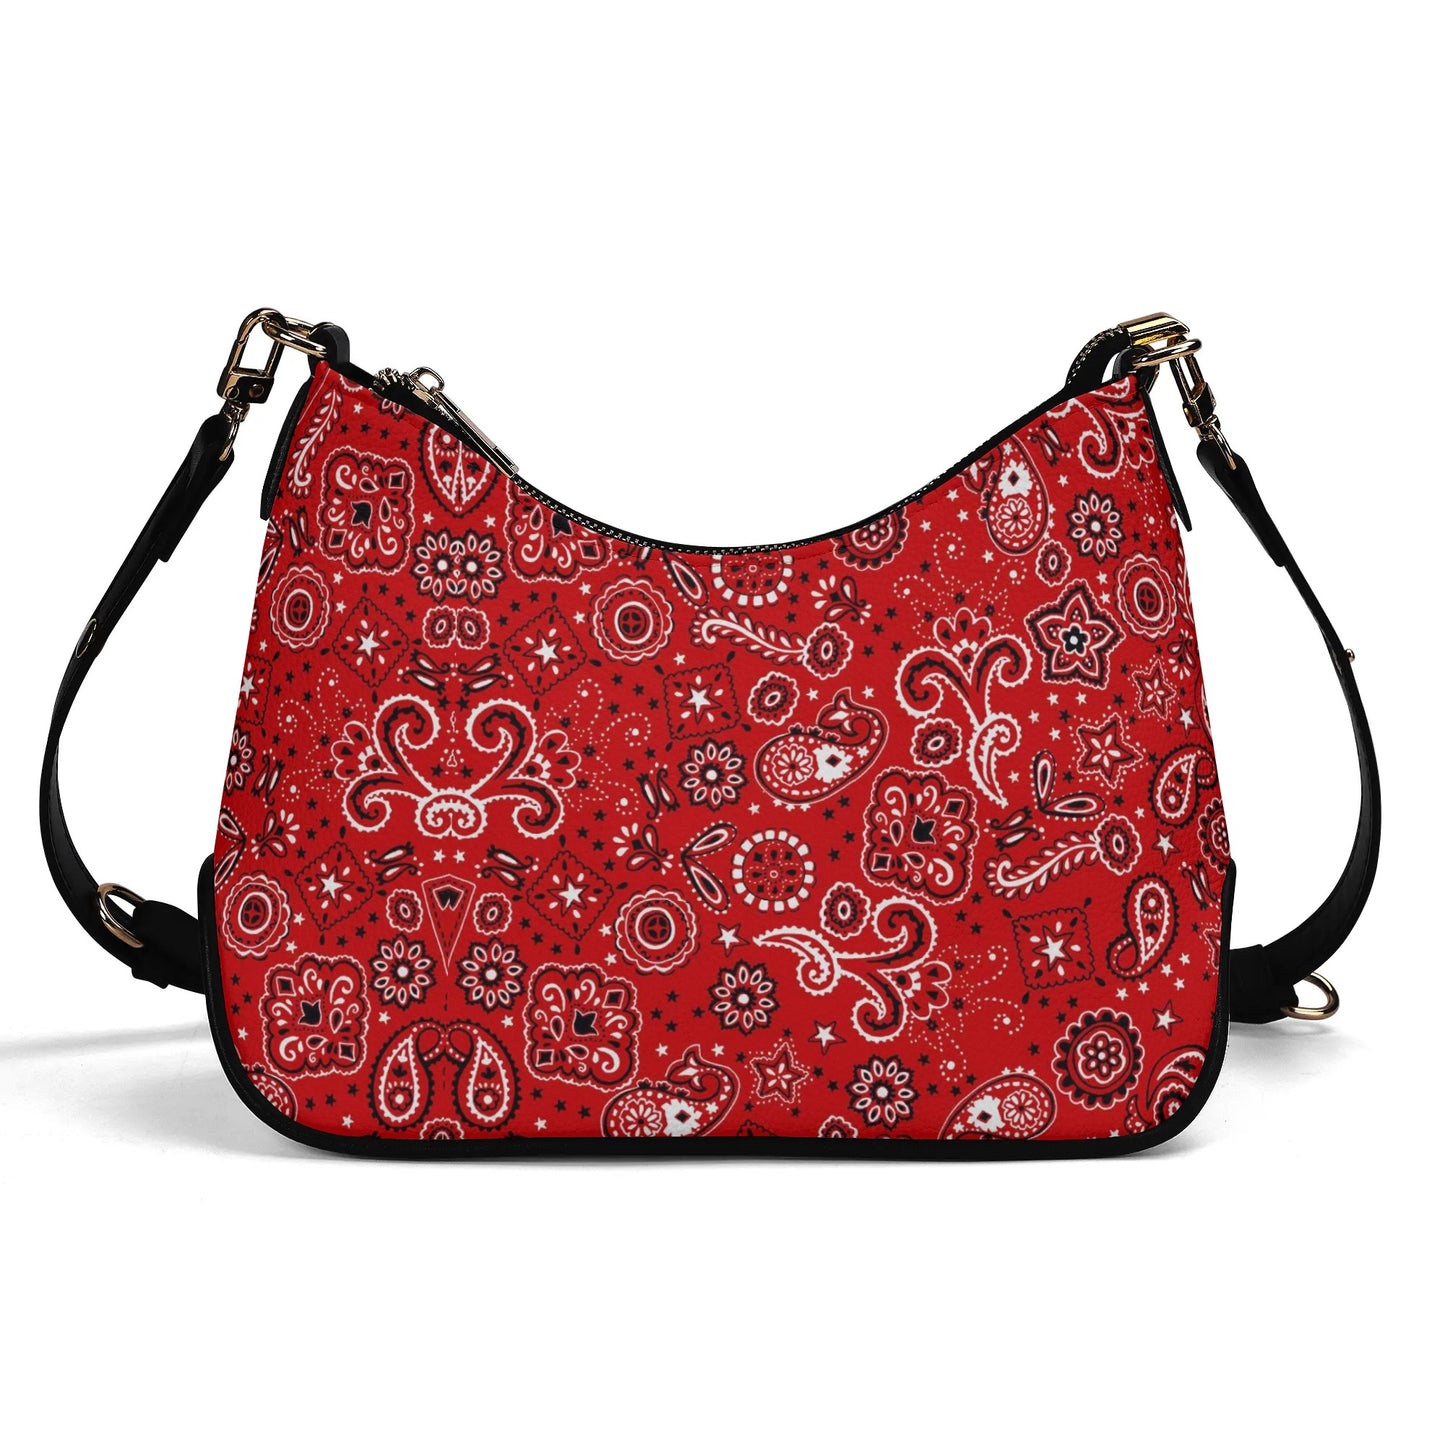 T4x Cross-body Red Scarf Pattern Bag with Chain Decoration